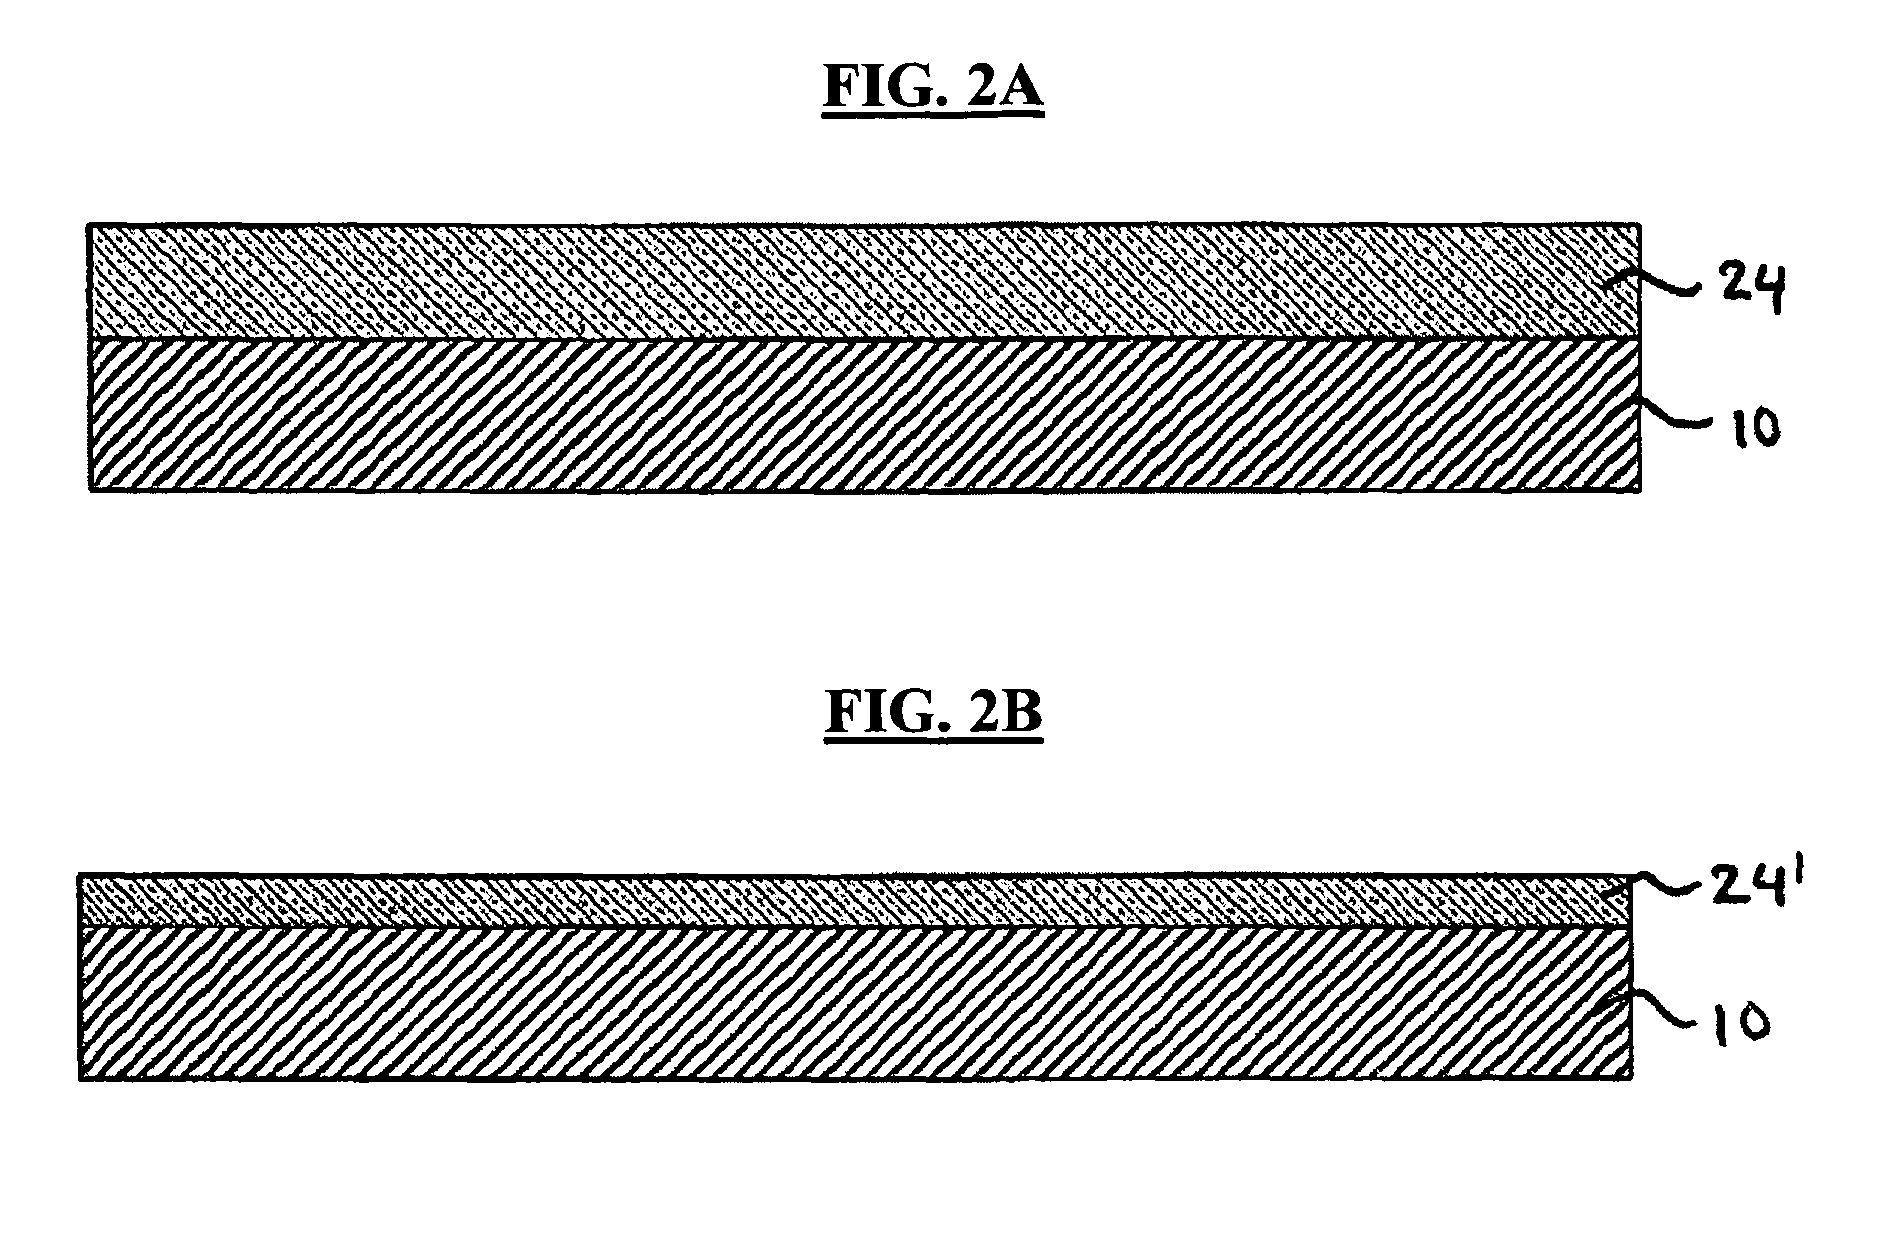 Boron-containing hydrogen silsesquioxane polymer, integrated circuit device formed using the same, and associated methods